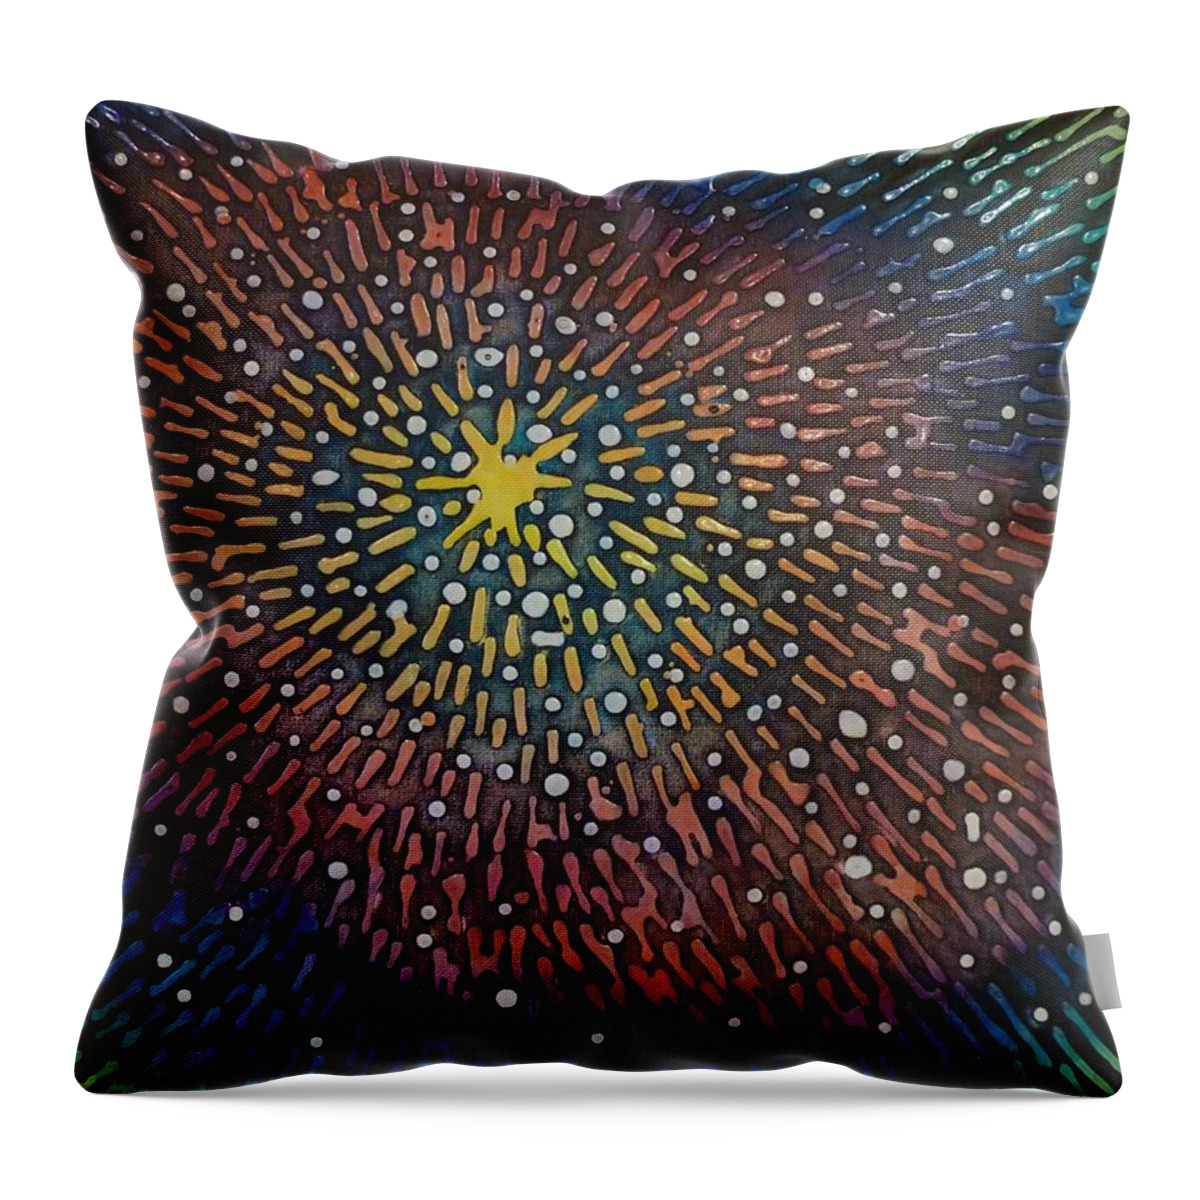 Nimoy Nebula Throw Pillow featuring the painting Nimoy Nebula by Amelie Simmons